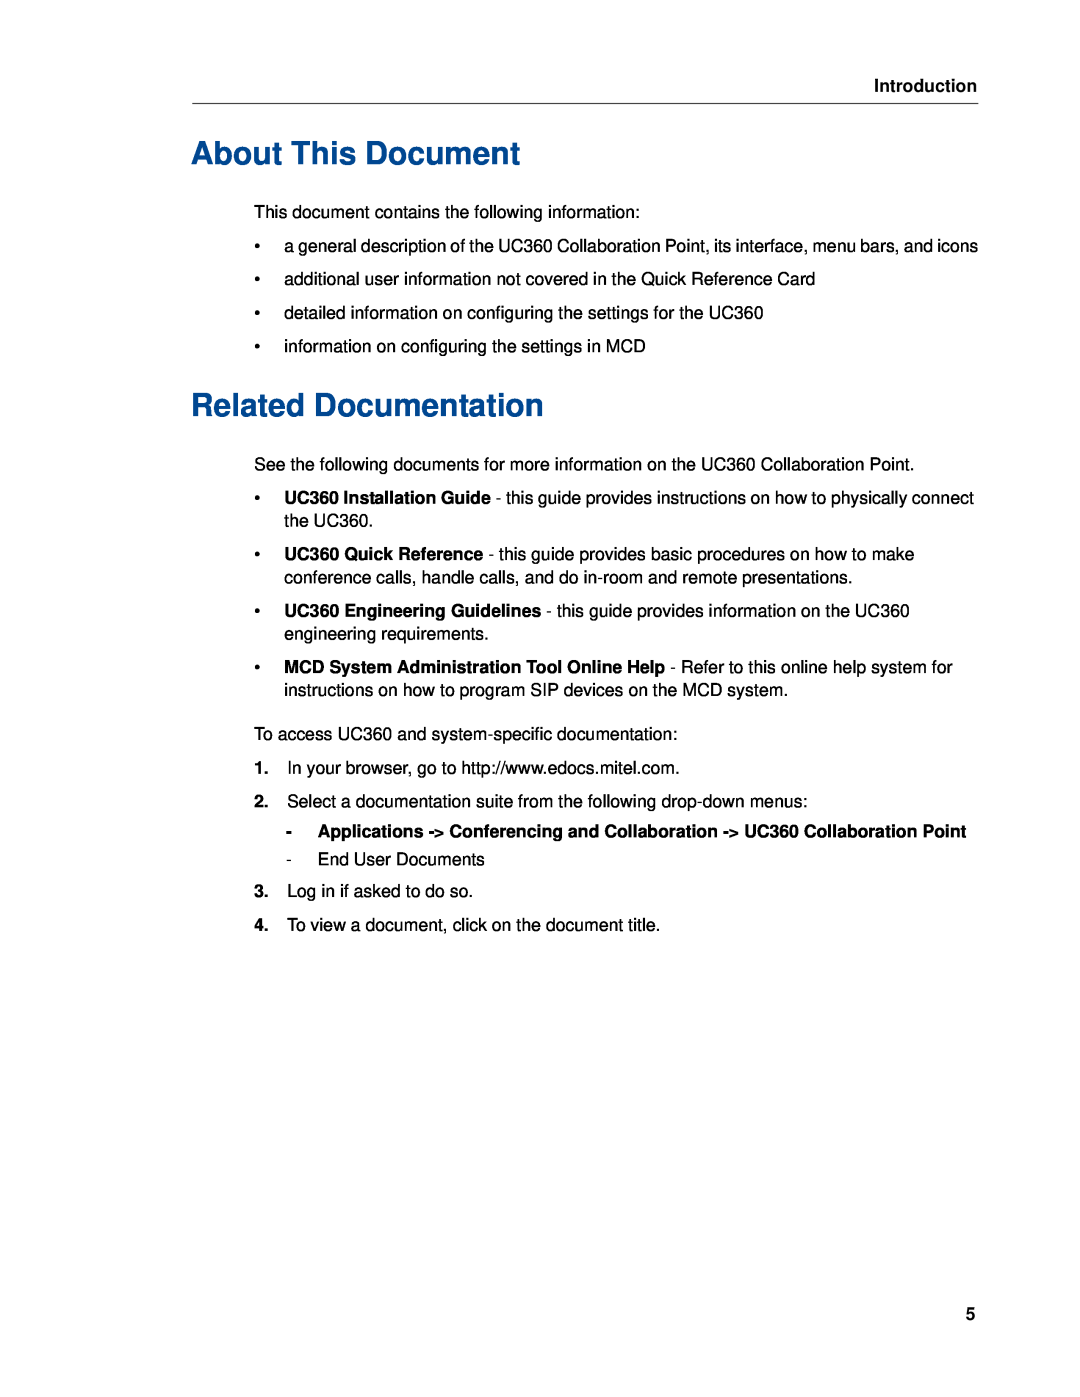 Mitel UC360 manual About This Document, Related Documentation, Introduction 